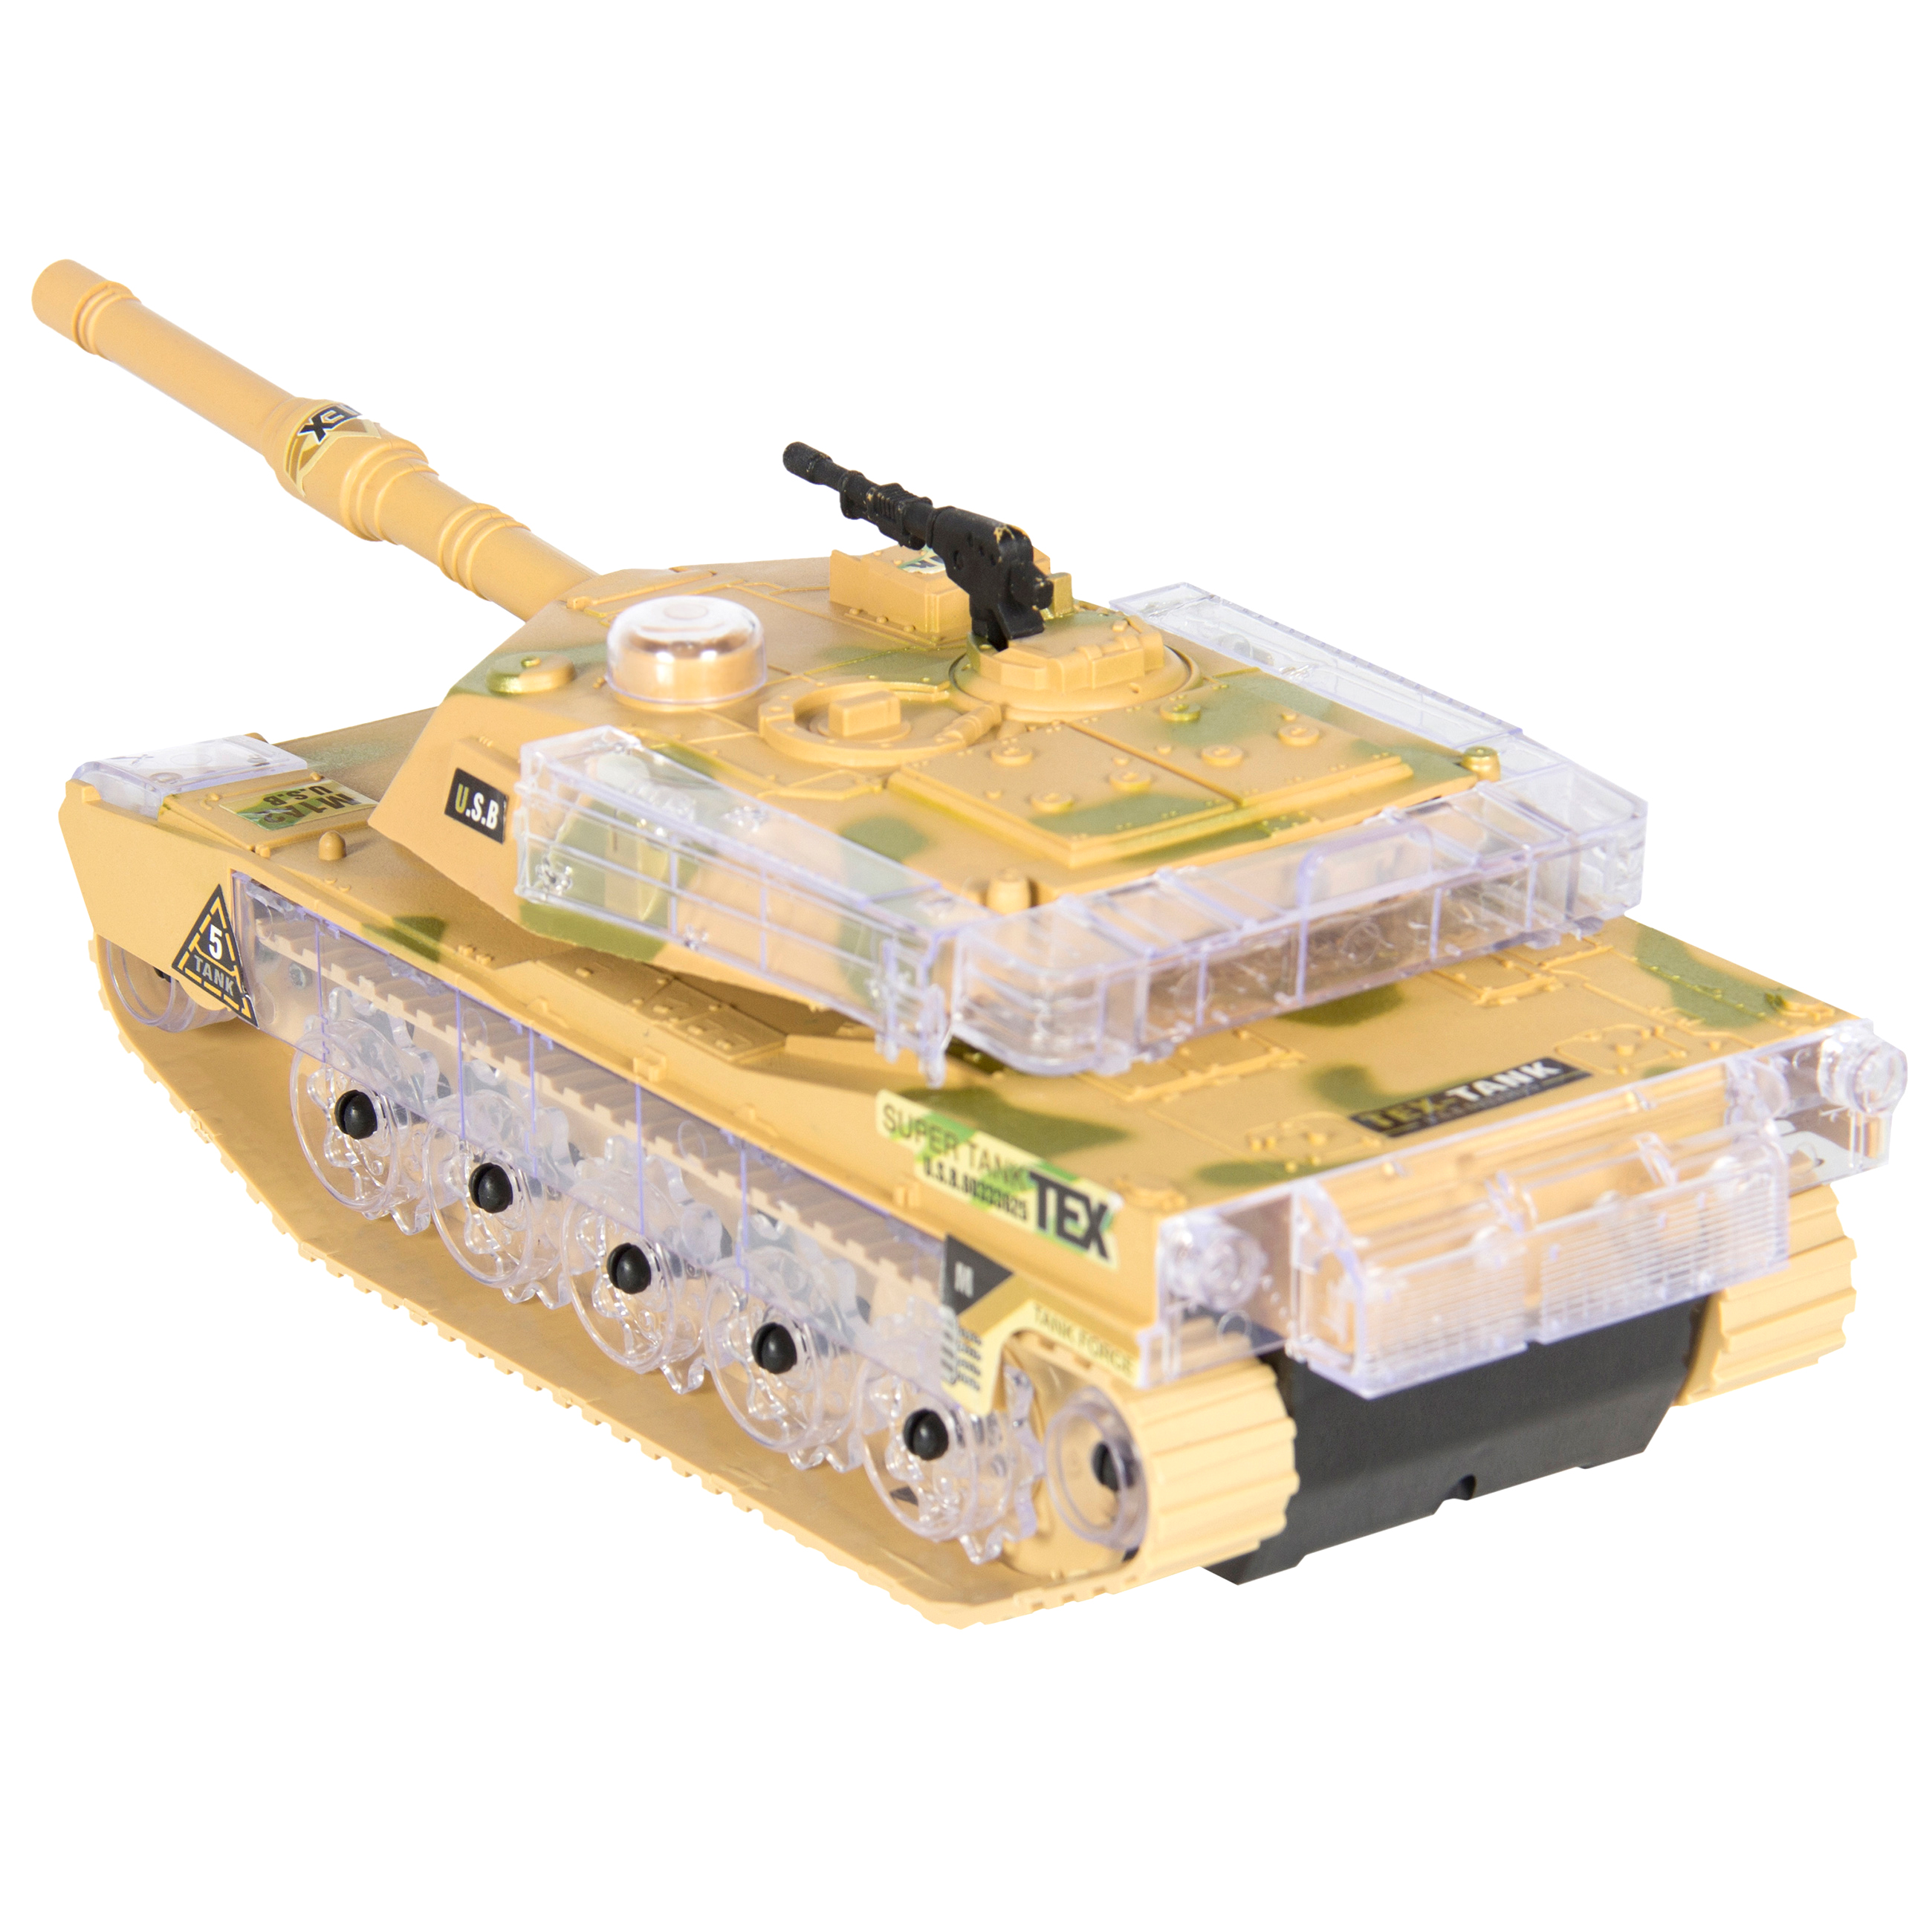 Best Choice Products Kids Military Army Tank Toy w/ Flashing Lights and Sound, Bump and Go Action - Beige - image 4 of 5